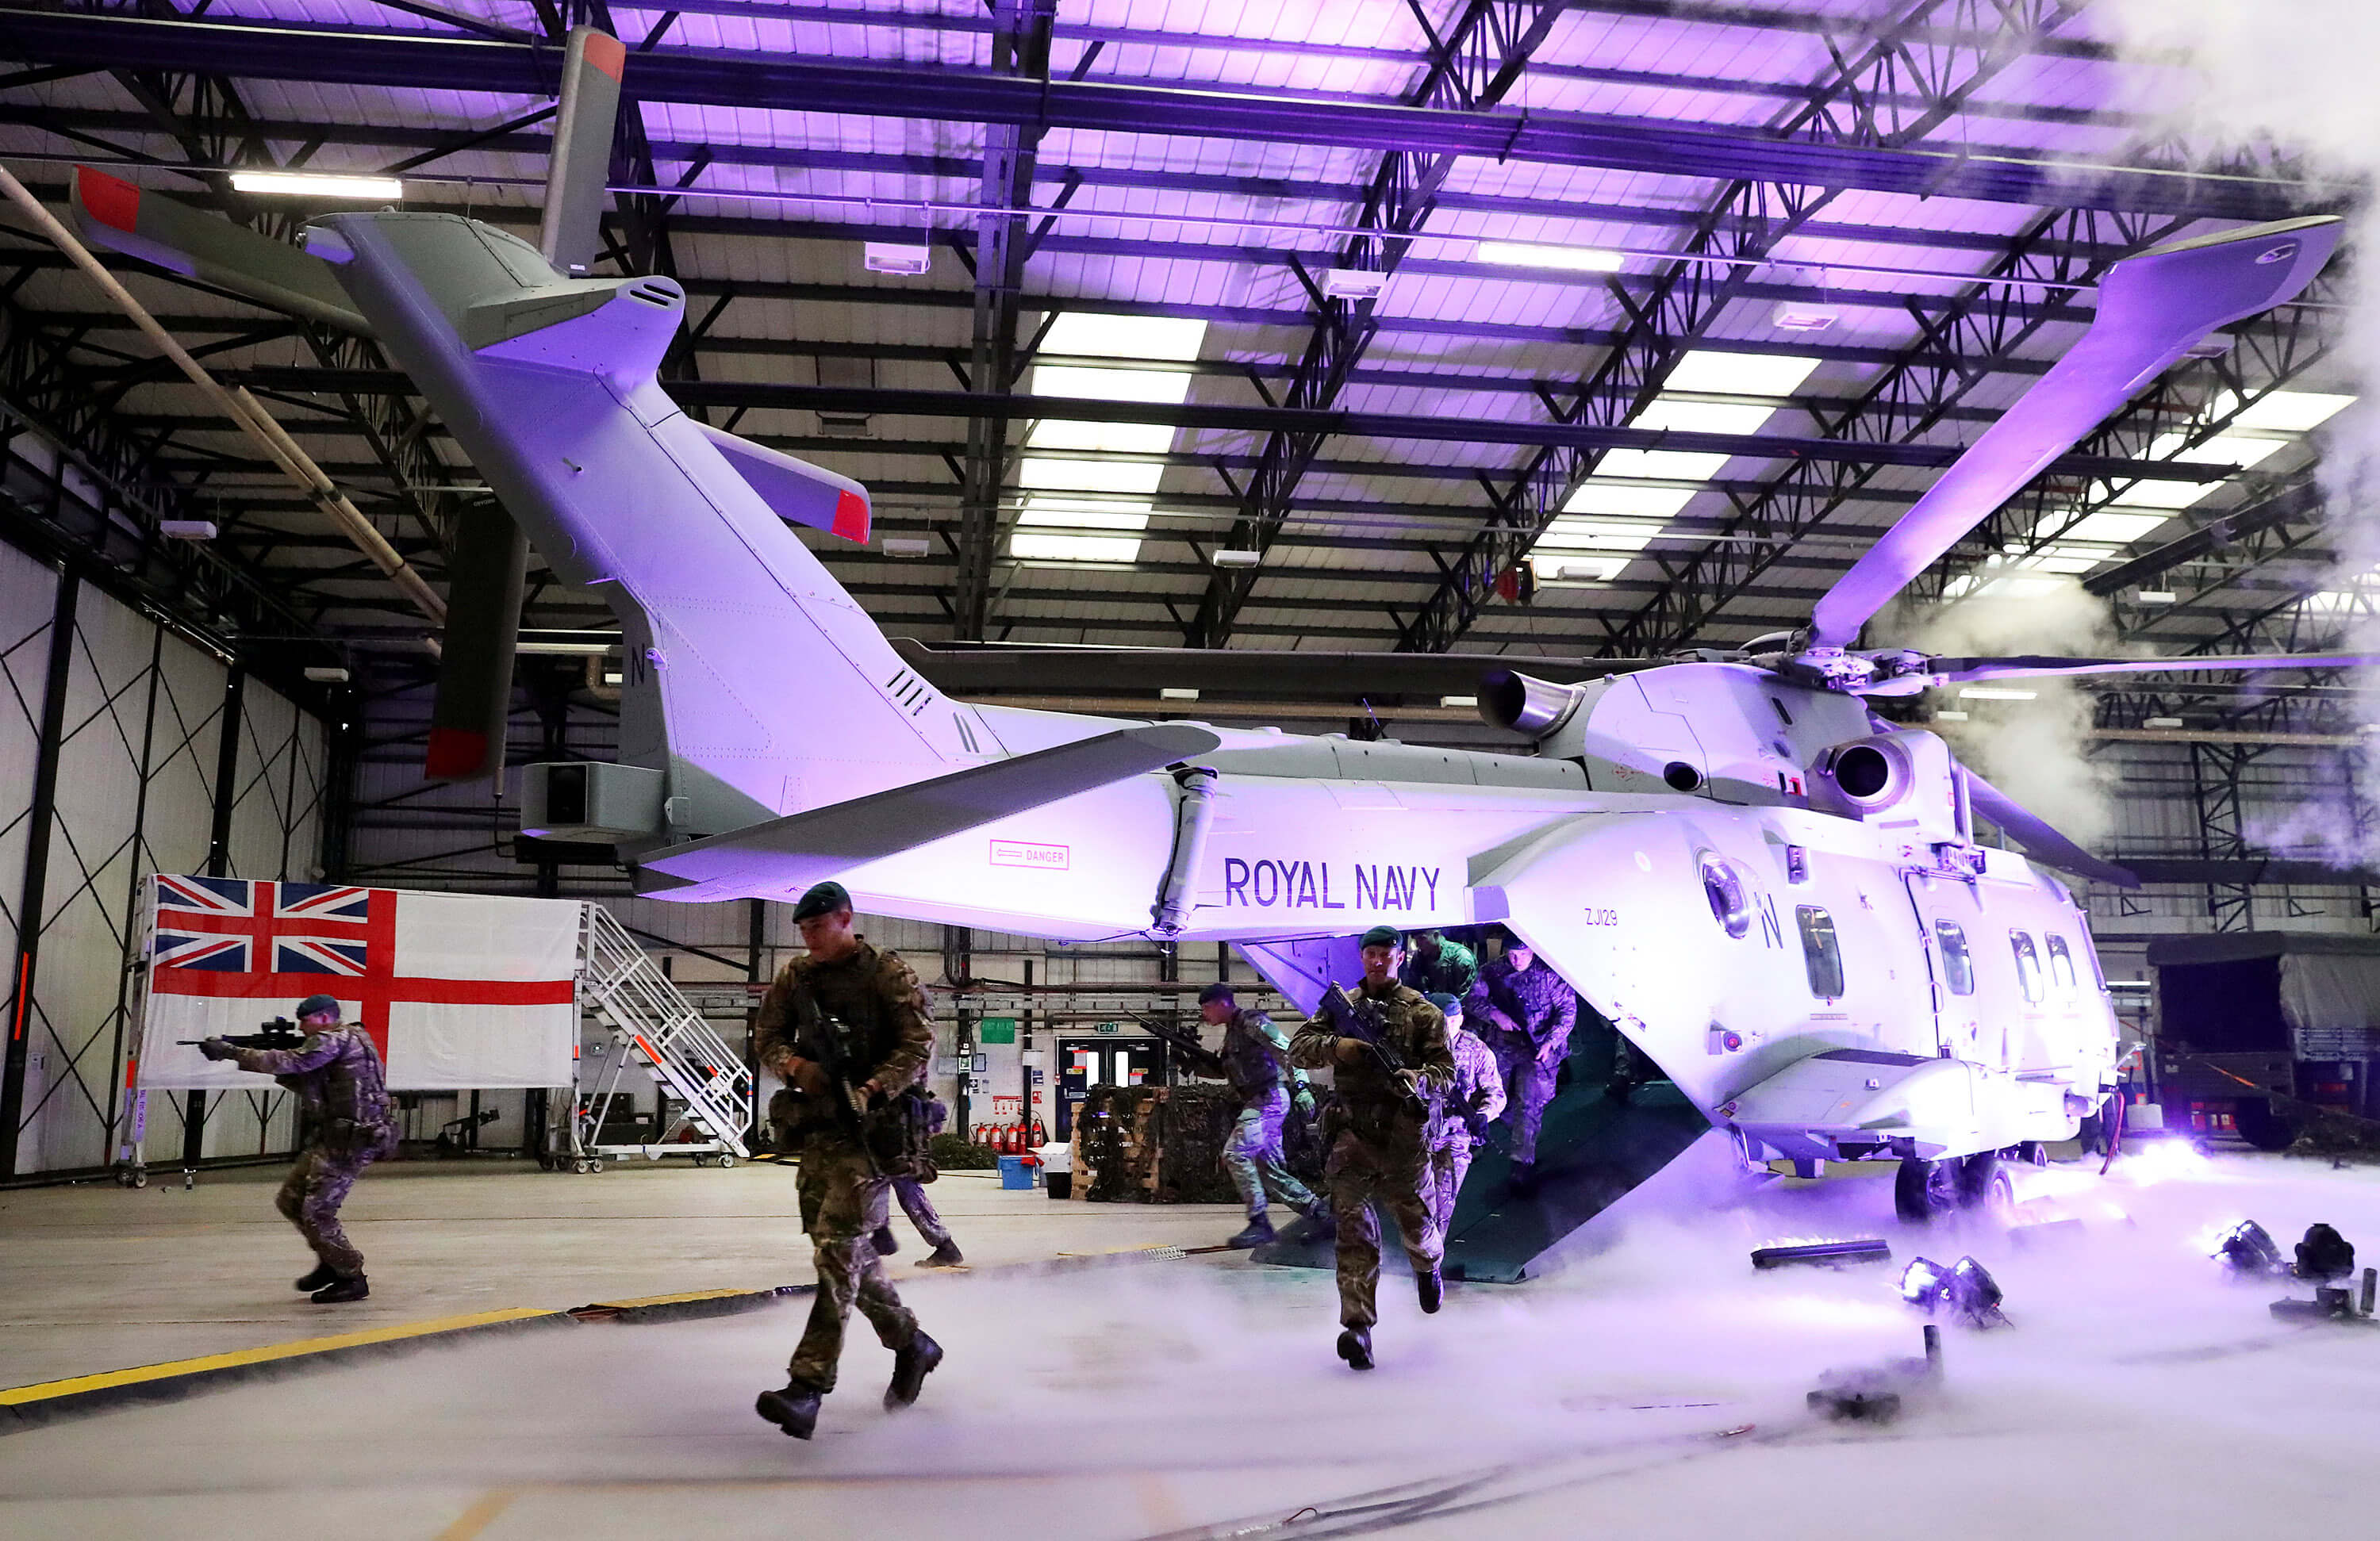 A helicopter lit up by a purple light in a hangar